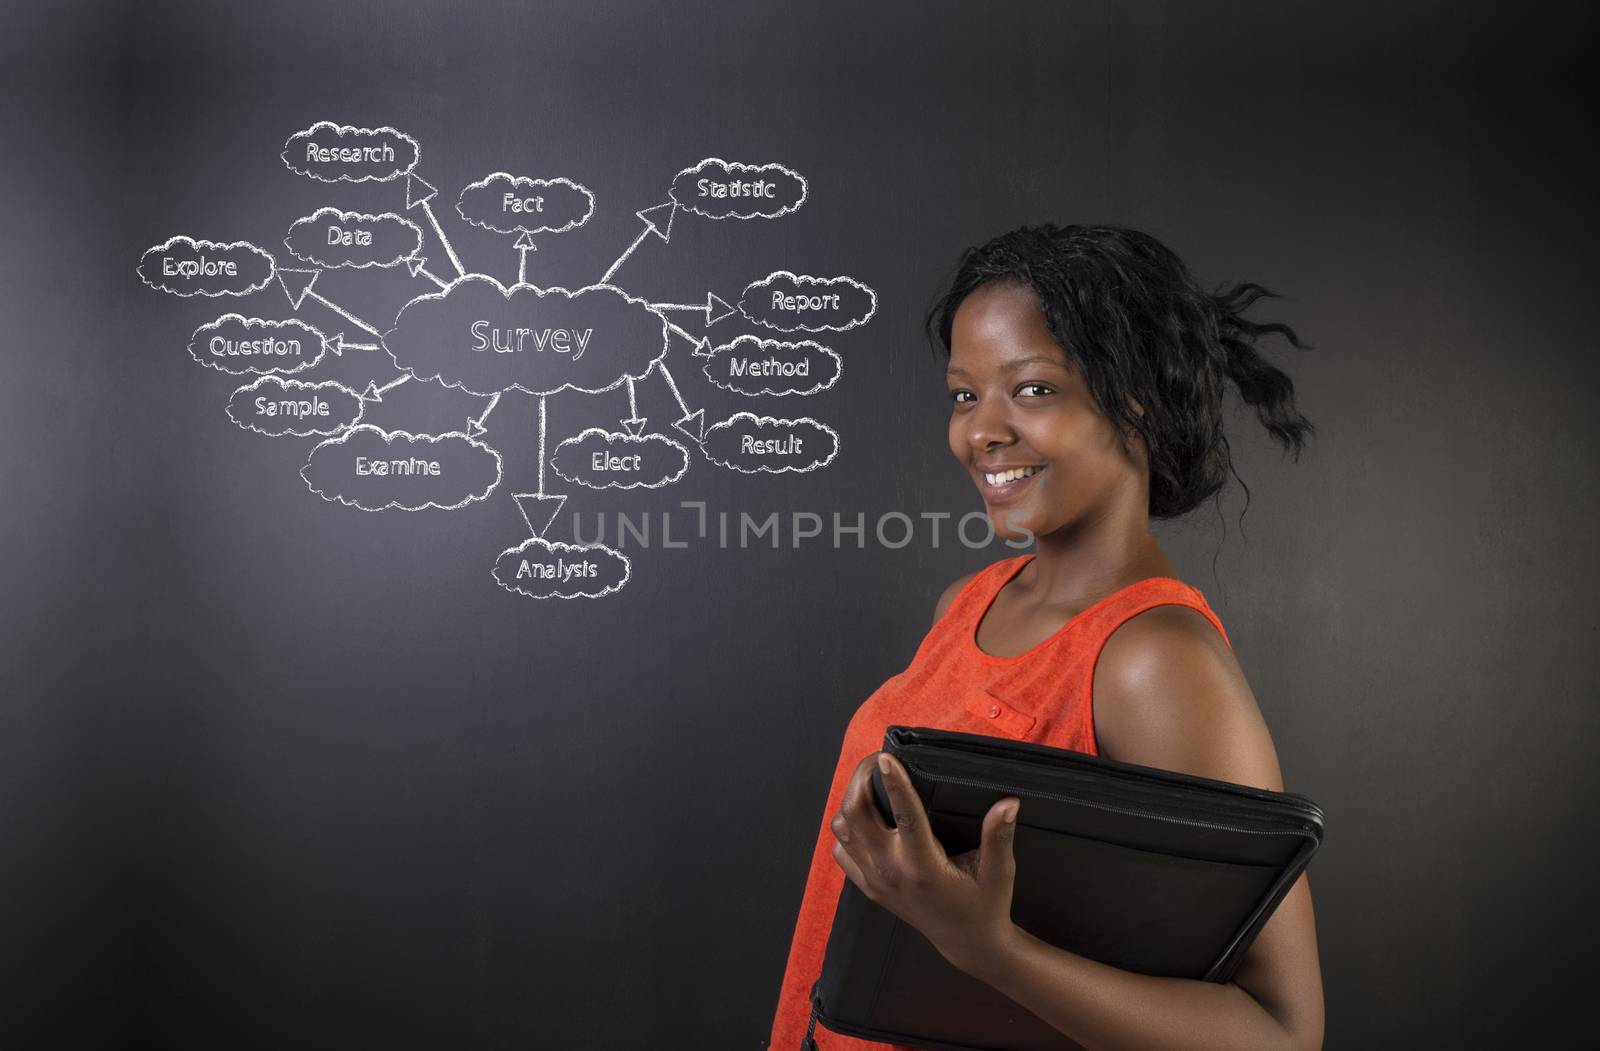 South African or African American woman teacher or student holding hand a diary or book standing against a blackboard background with a chalk survey diagram concept